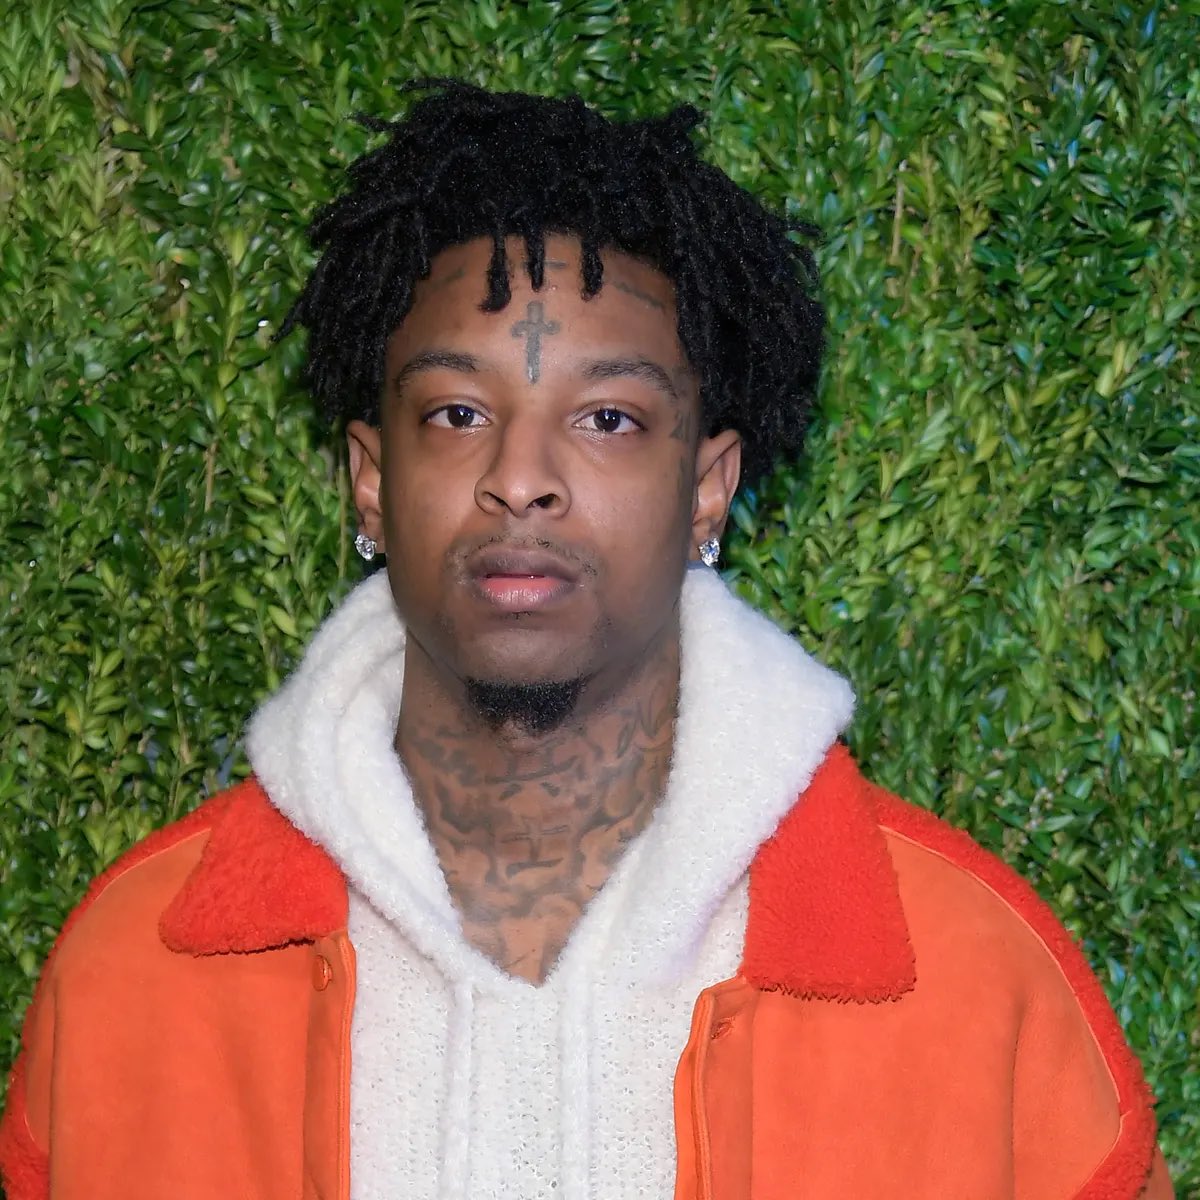 DiscussingFilm on X: 21 Savage is set to exec-produce the music for  'SPIRAL: FROM THE BOOK OF SAW'. (Source:    / X